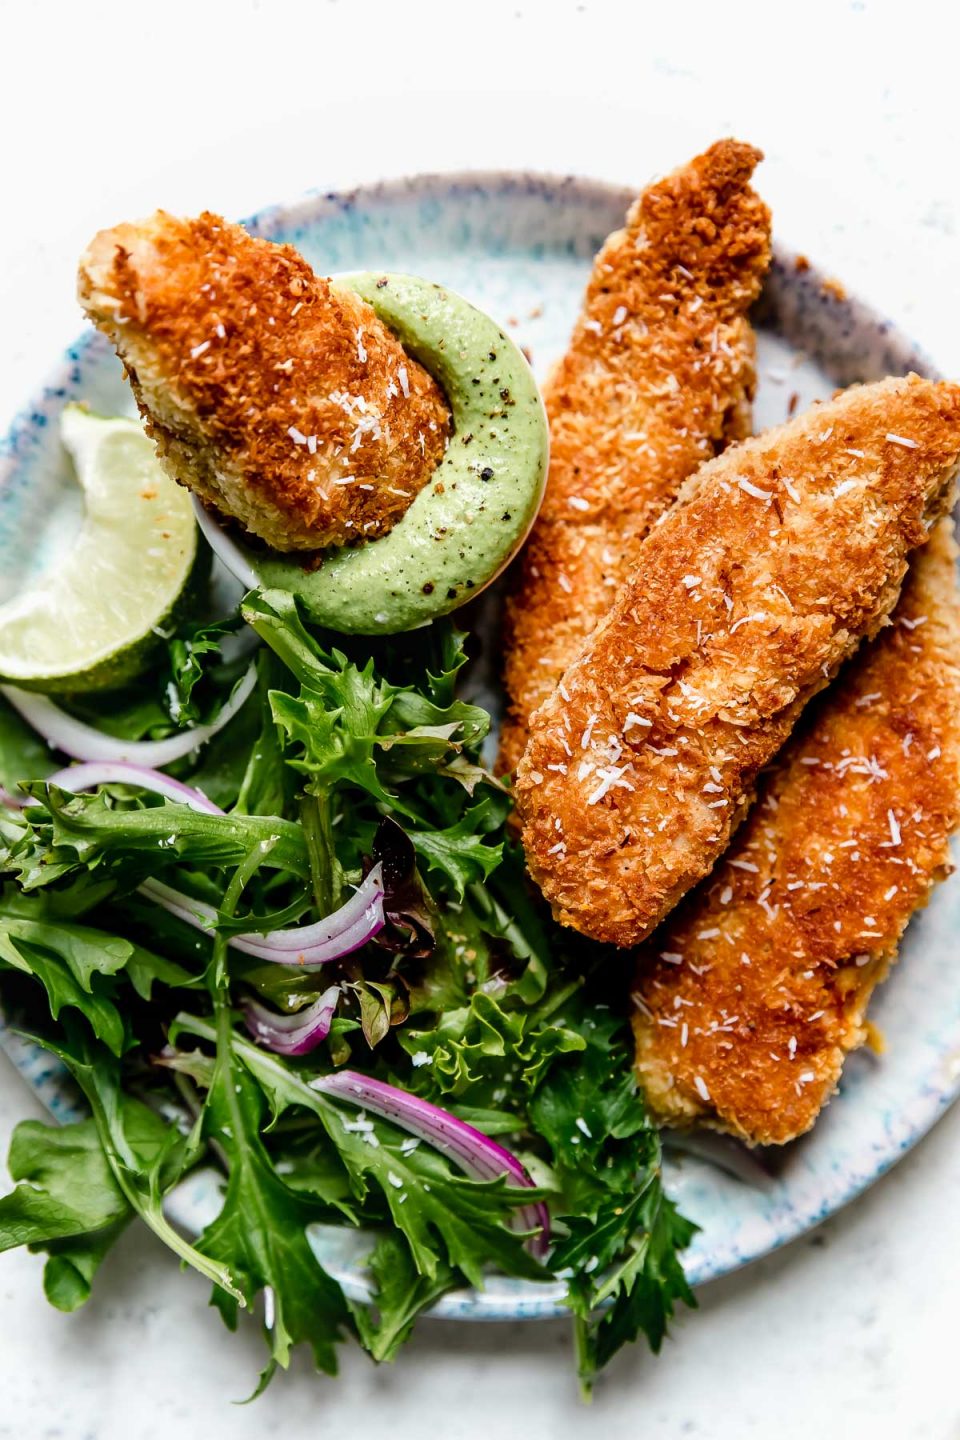 Crispy coconut chicken tenders on a blue-speckled plate with salad greens and cilantro-lime cashew crema for dipping.